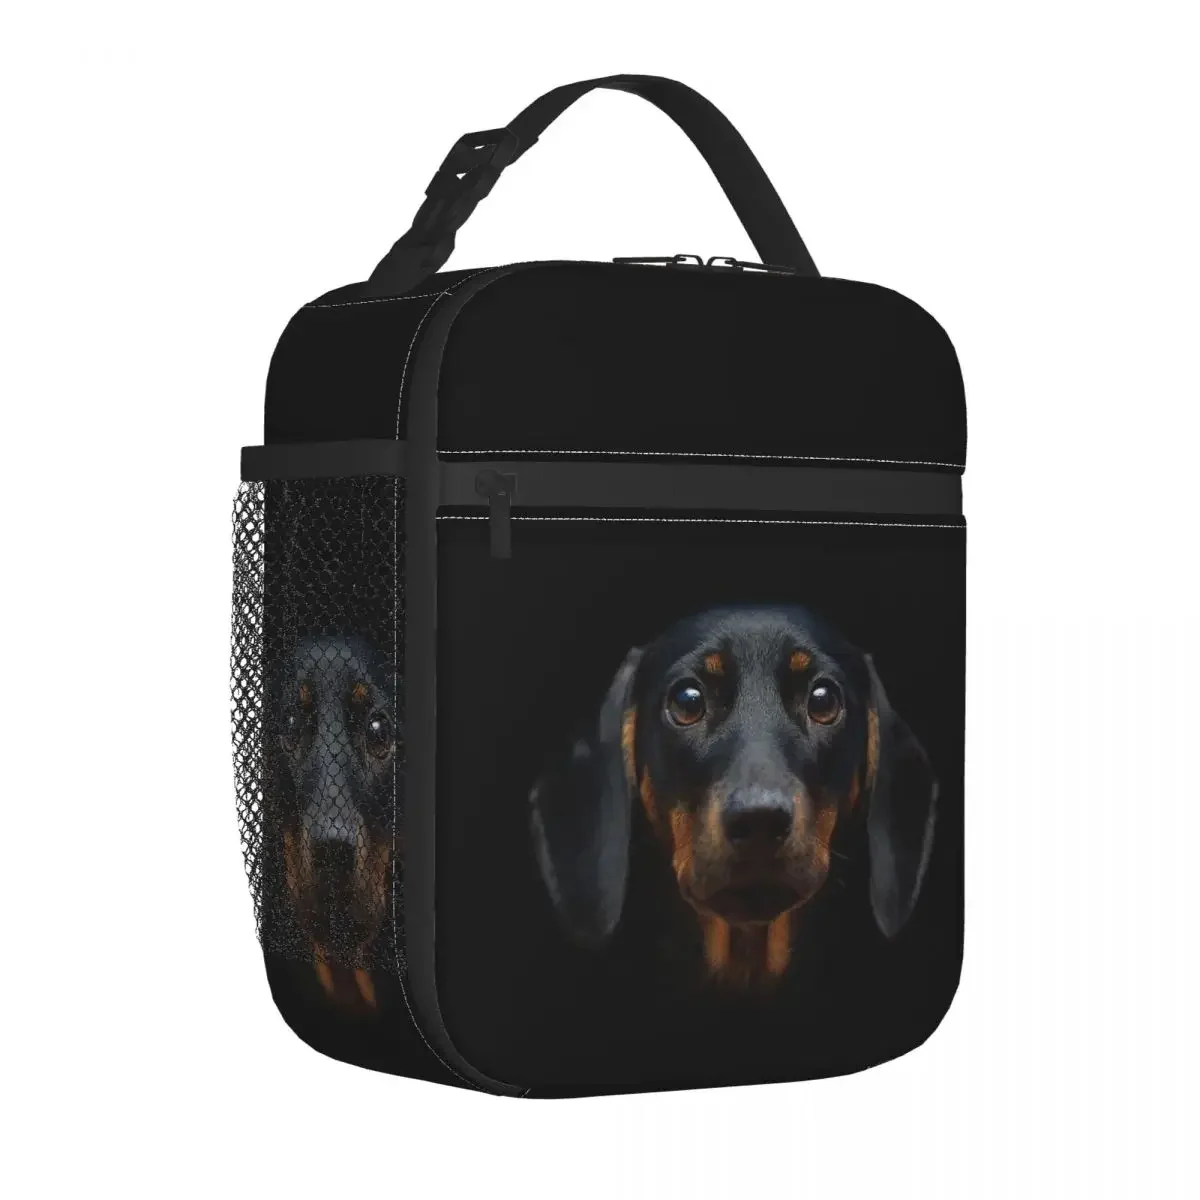 

Dachshund Dog Insulated Lunch Bags Portable Wiener Sausage Doxie Meal Container Cooler Bag Lunch Box Tote College Picnic Bags